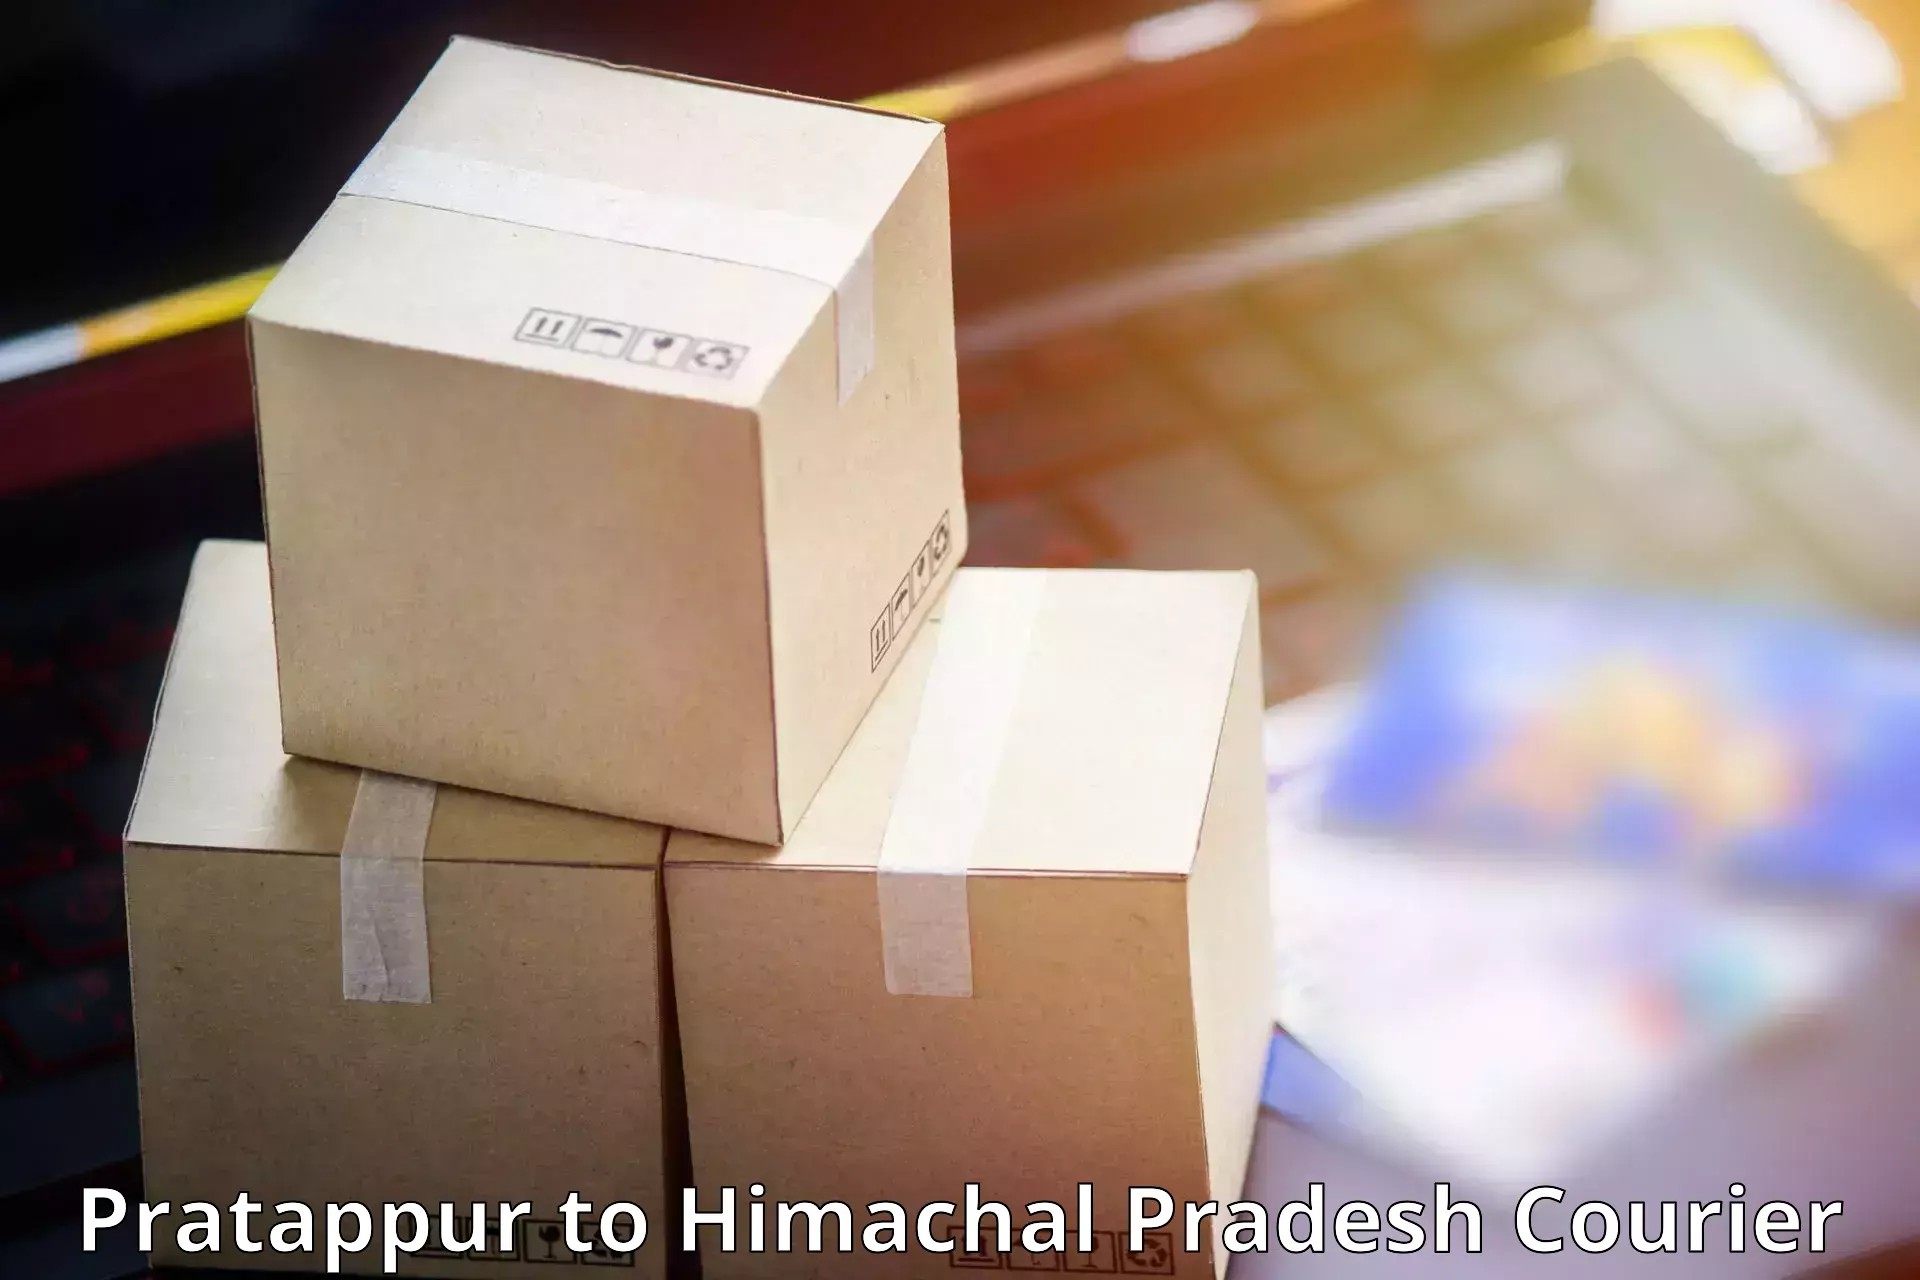 State-of-the-art courier technology Pratappur to Sundla